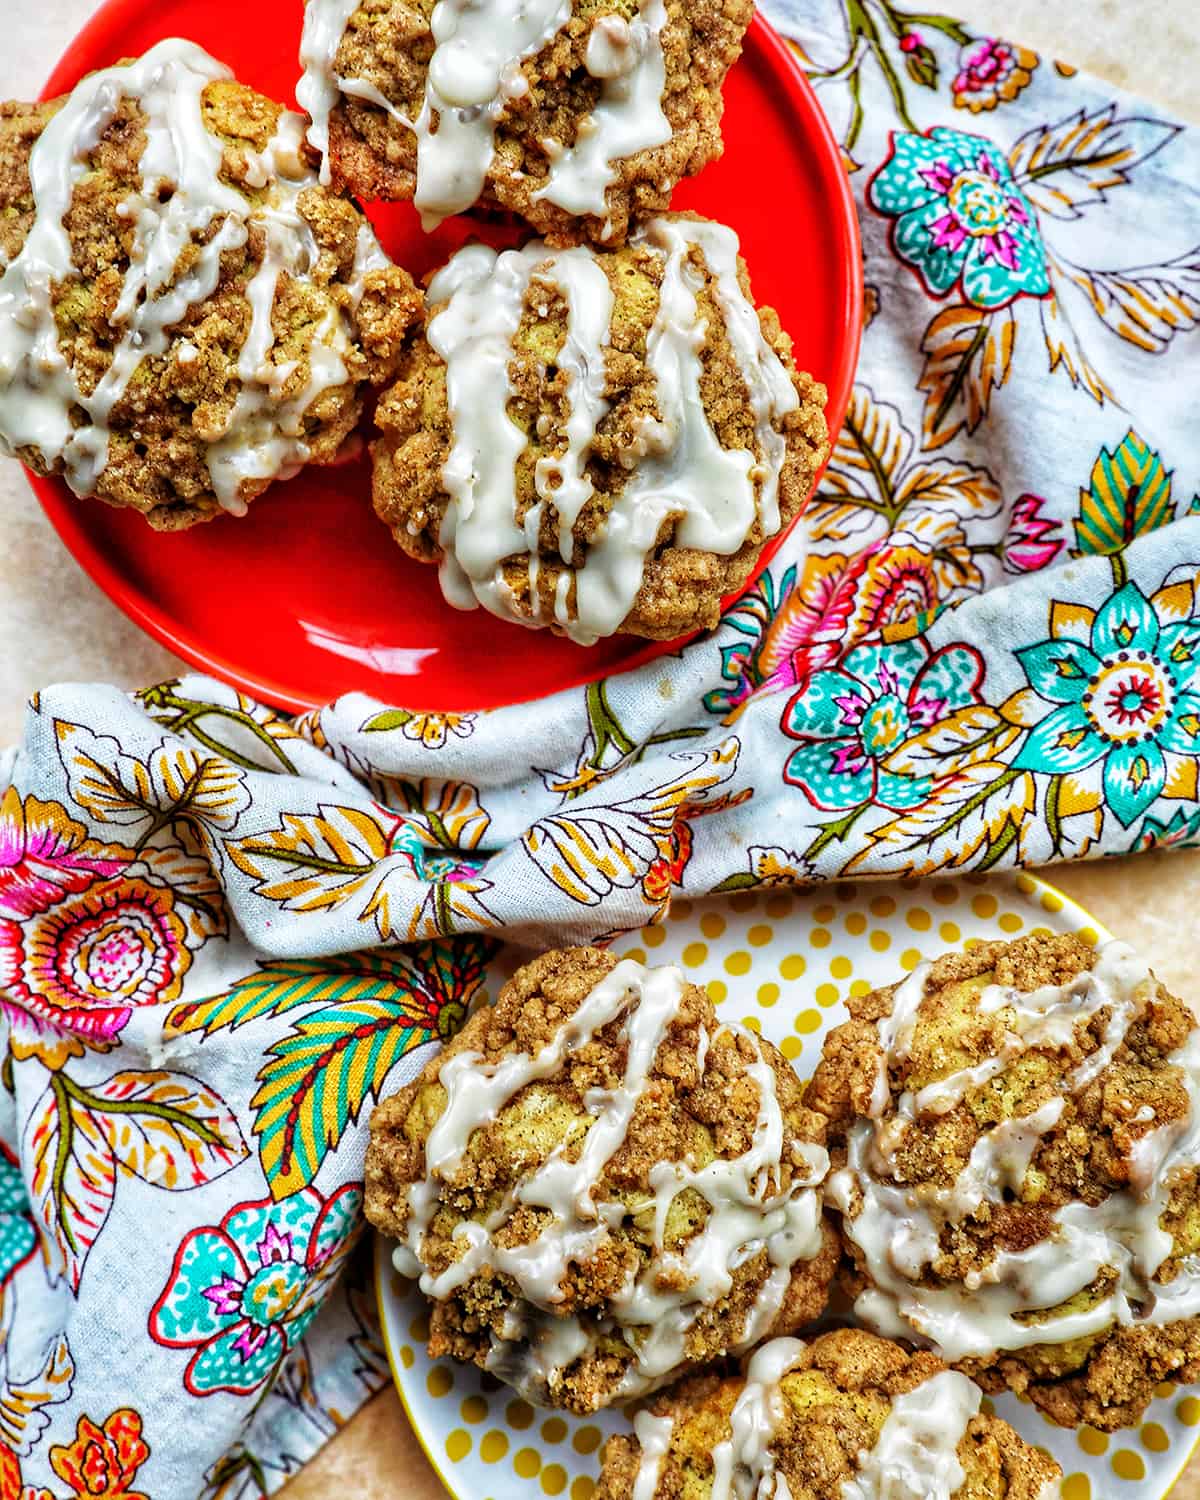 vegan streusel muffins with glaze on two plates and a colorful floral napkin.